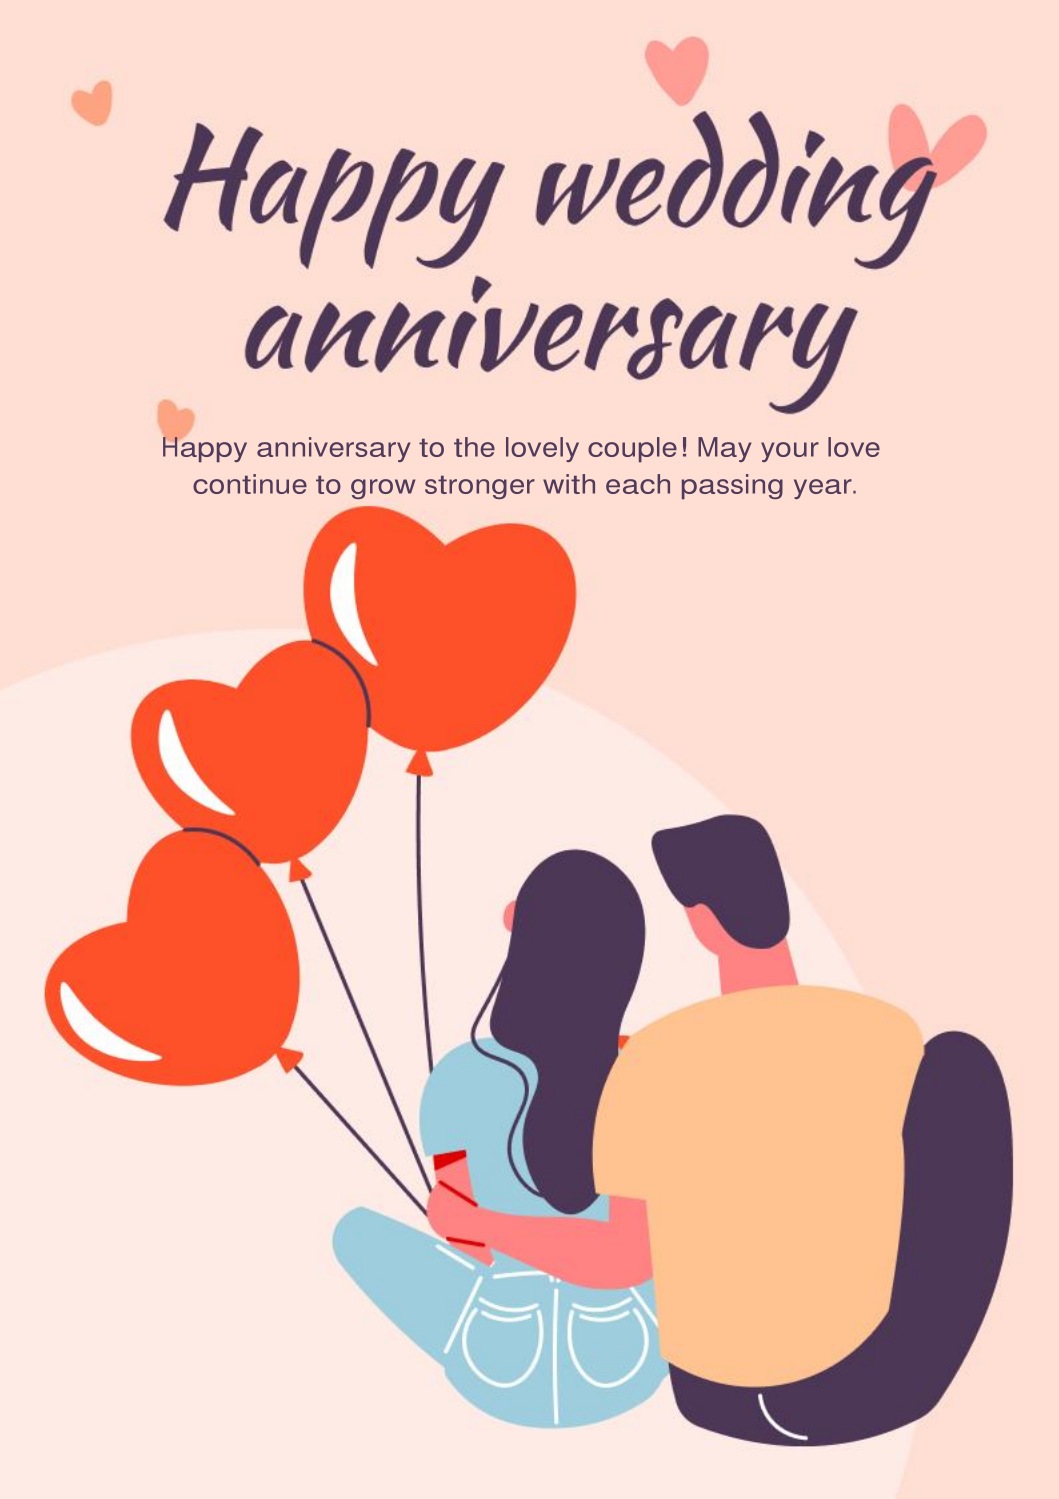 15 Heart-Touching Anniversary Wishes for Husband